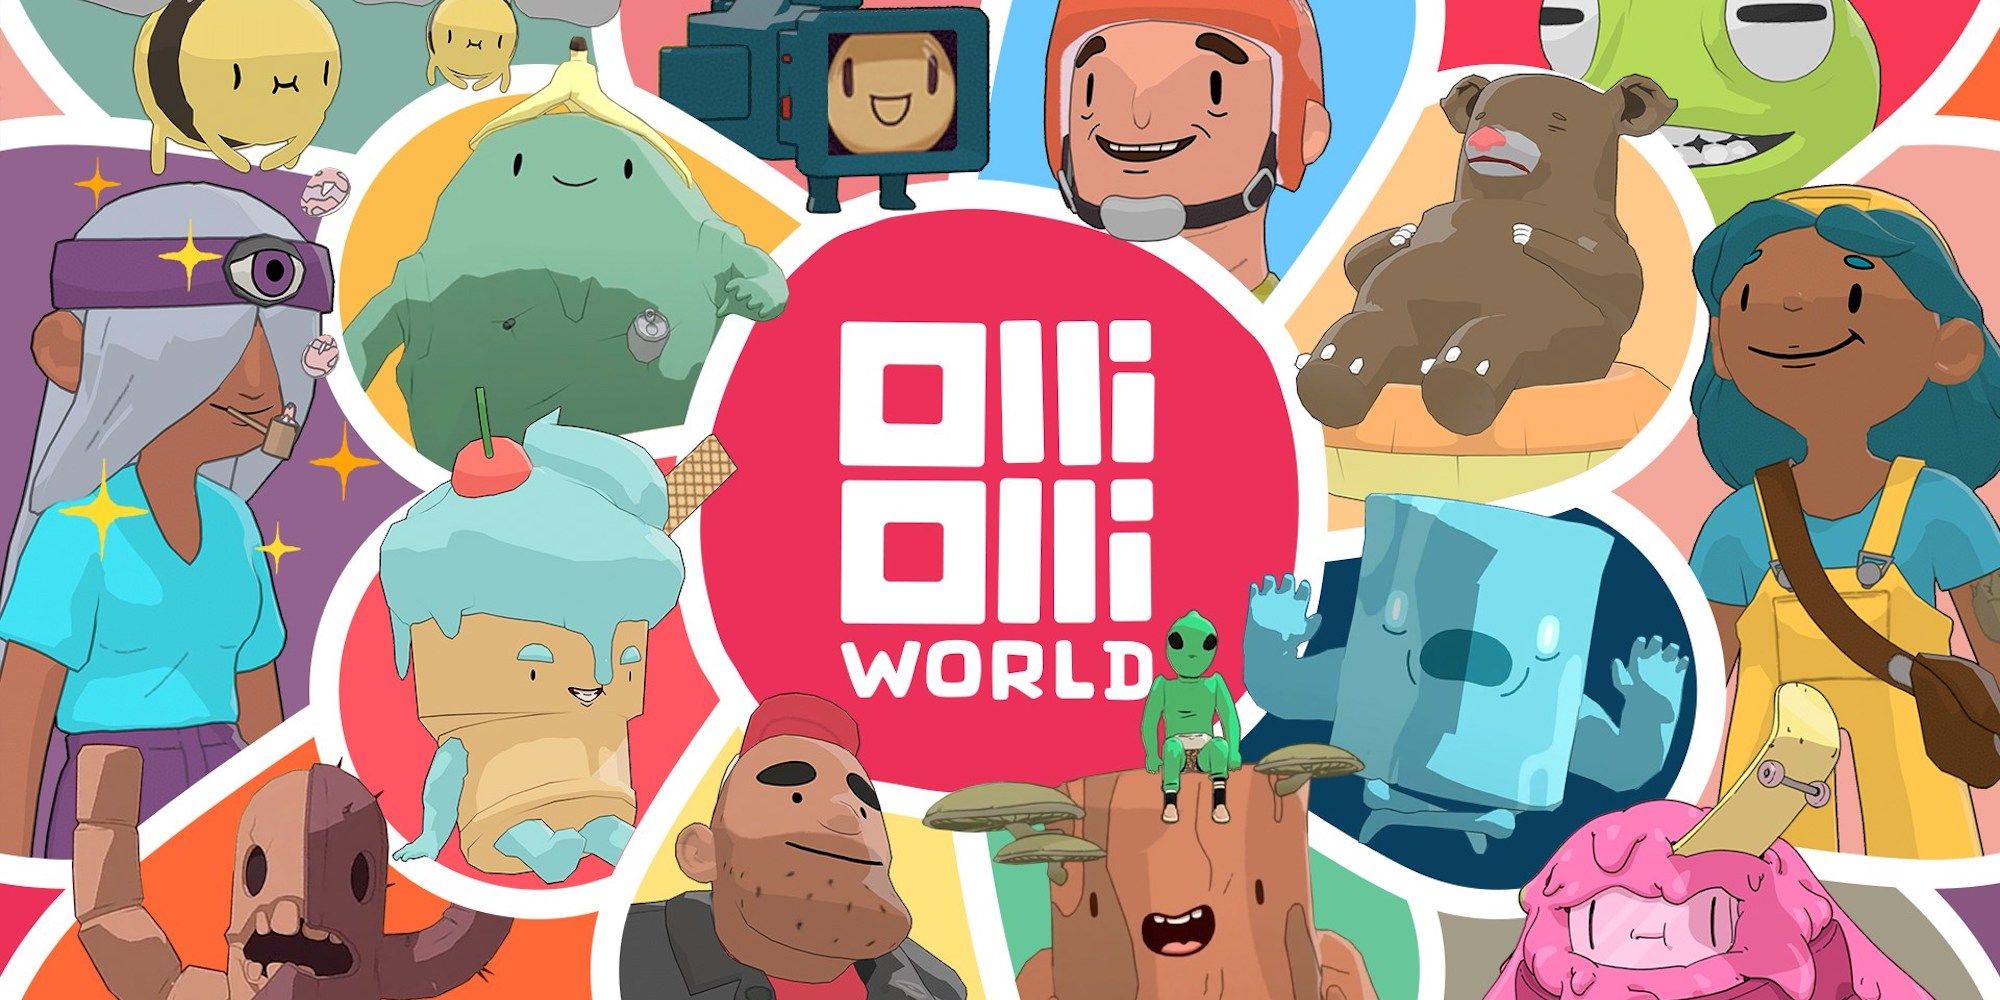 Mashup of OlliOlli World's characters including bee and ice cream cone